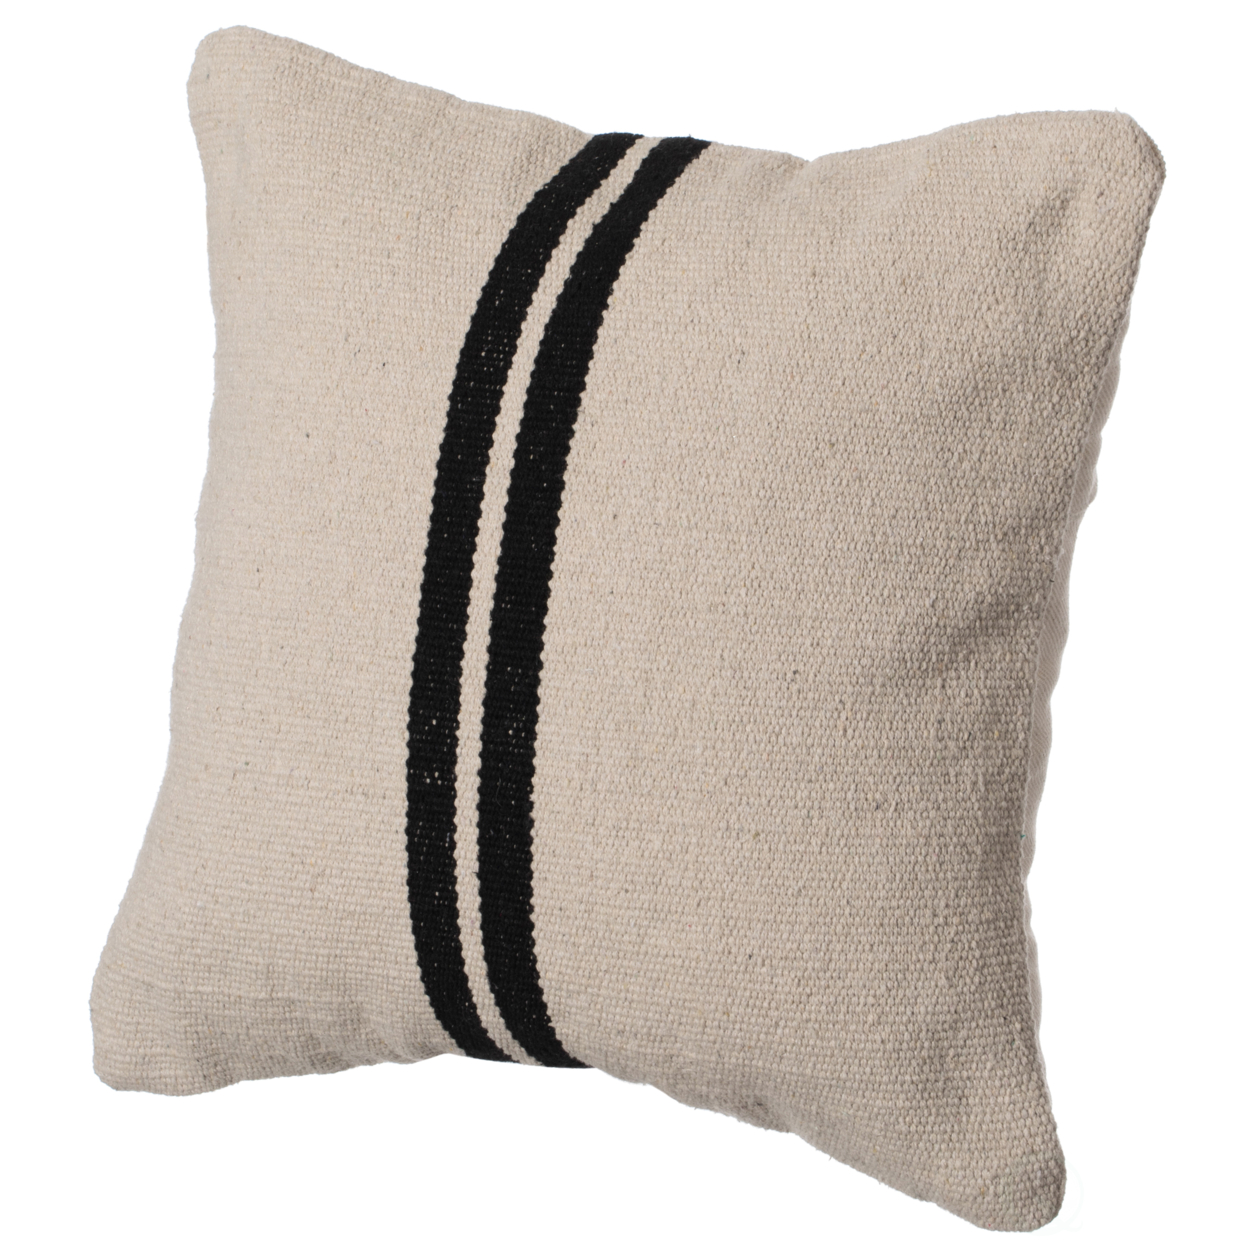 16 Handwoven Cotton Throw Pillow Cover Flat Natural Design - Drawstring With Cushion